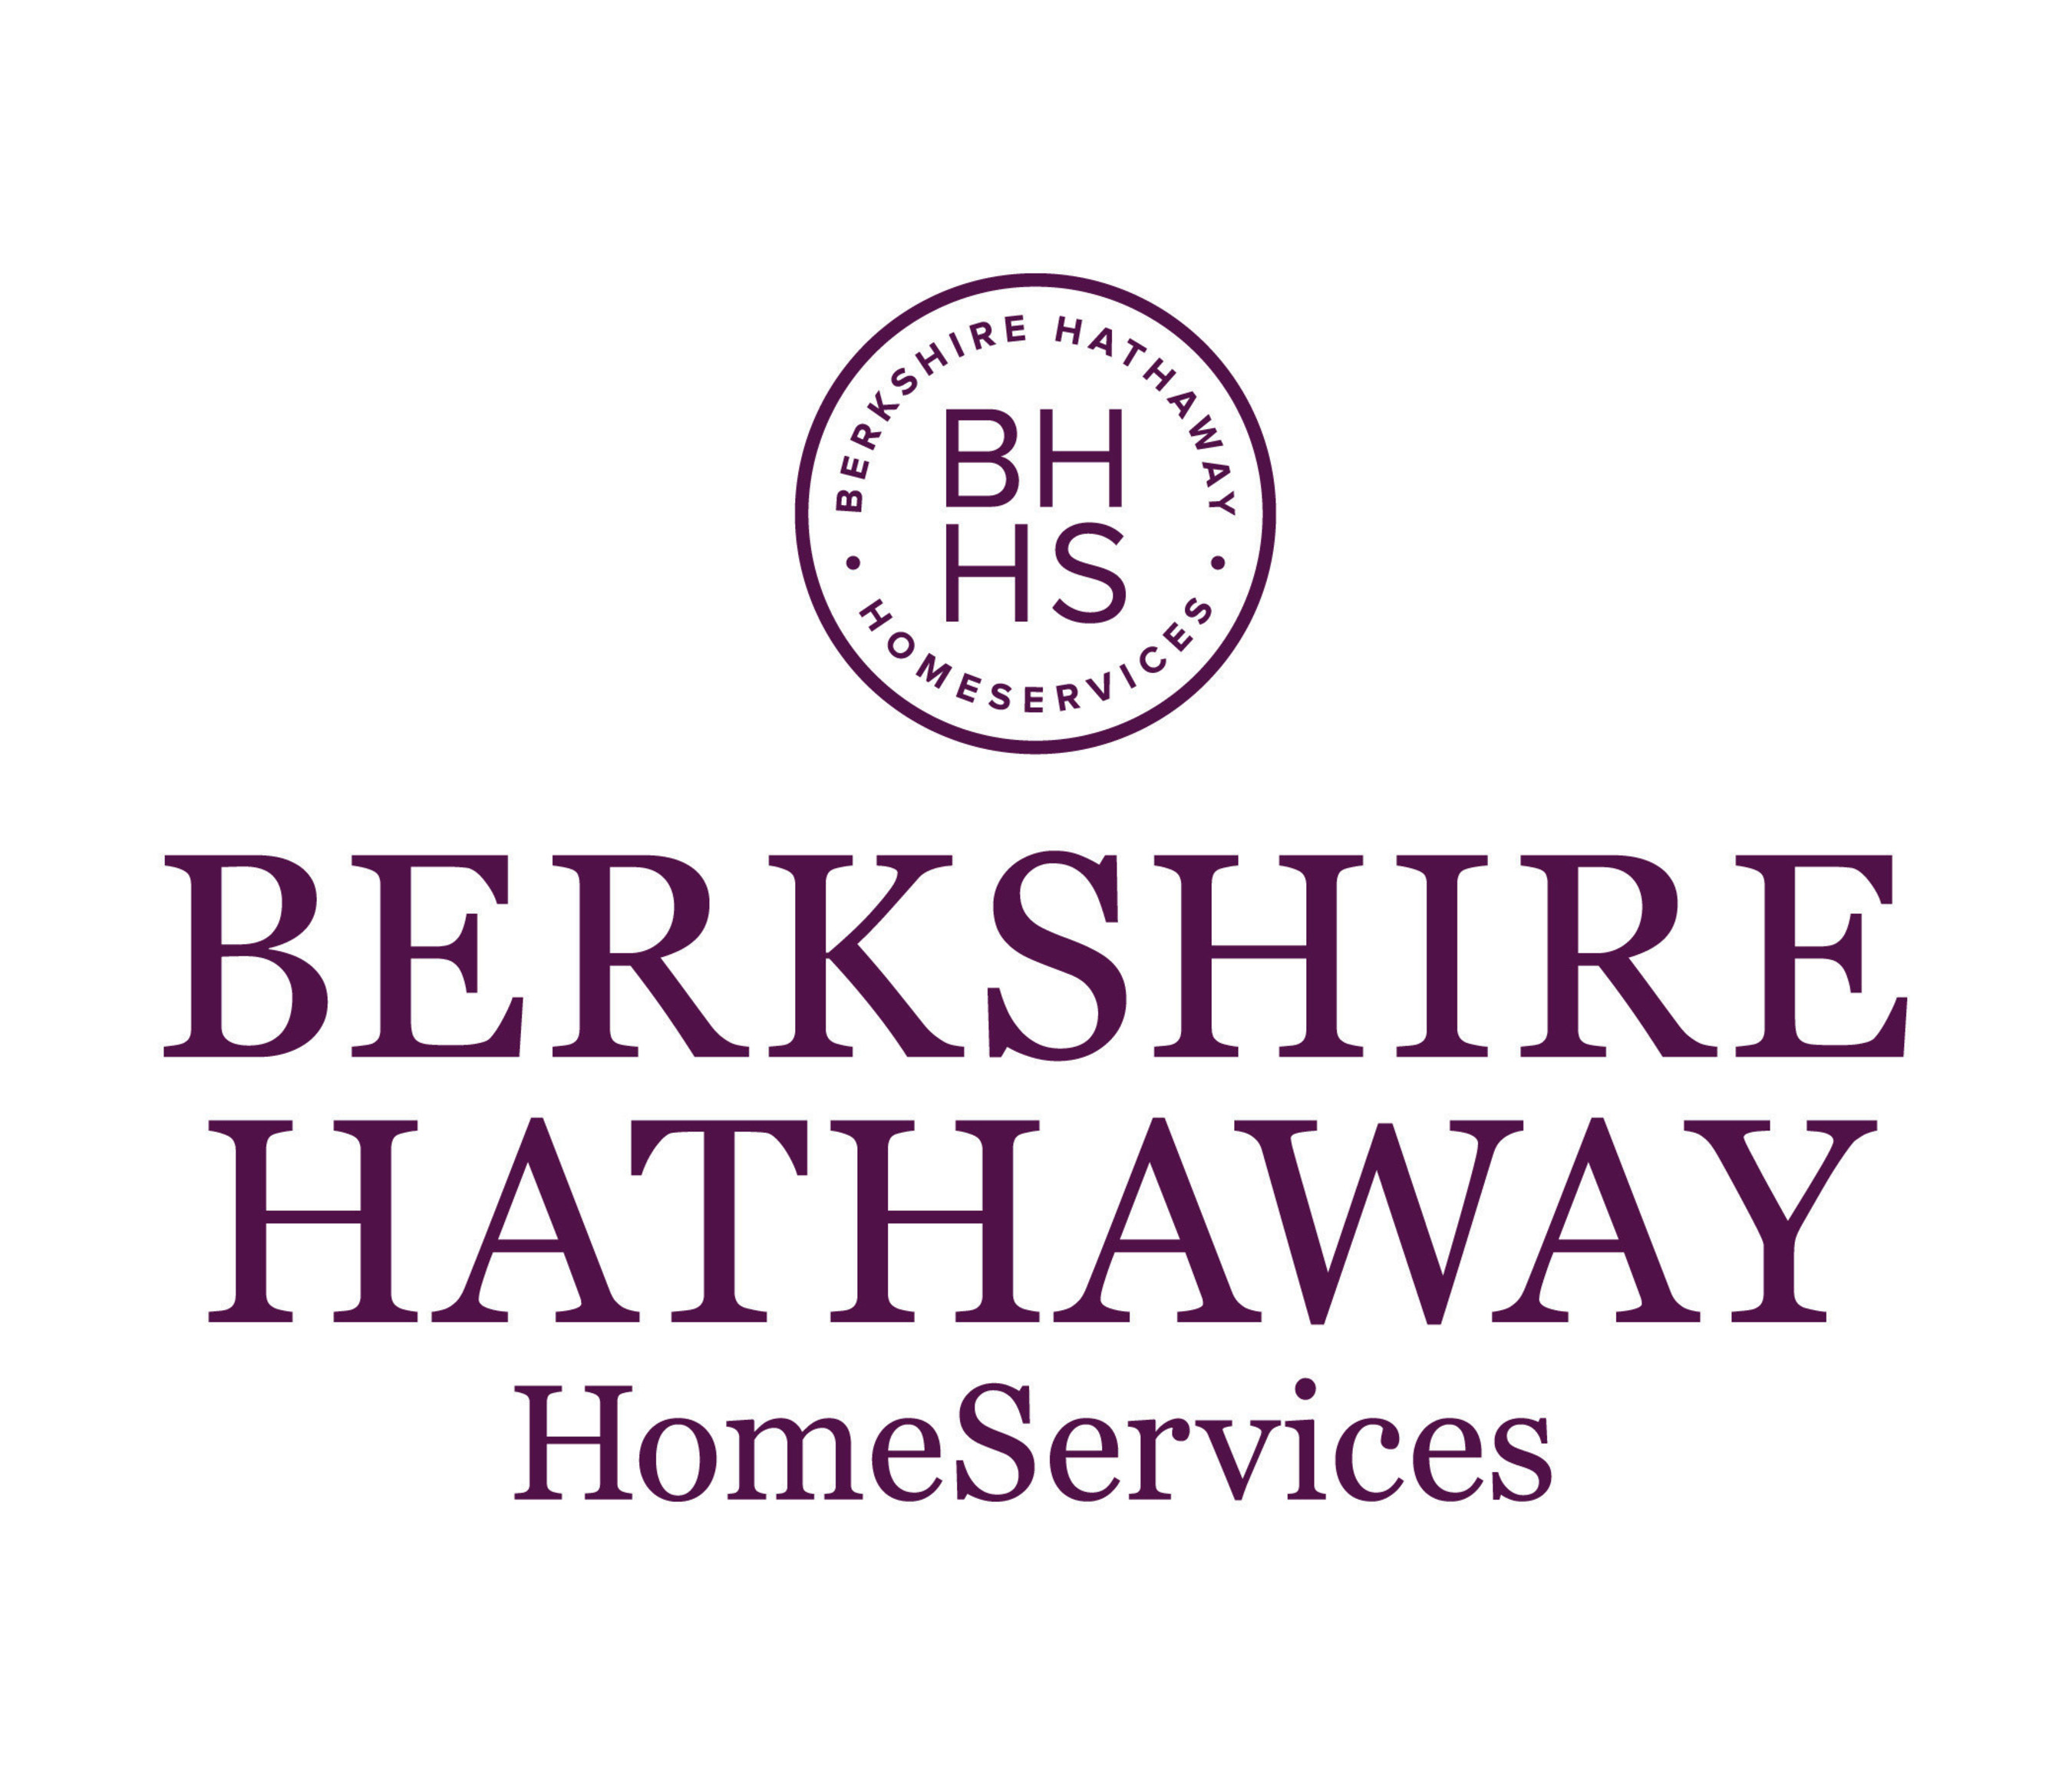 Berkshire Hathaway HomeServices Georgia Properties is proud to announce that president & CEO, Dan Forsman was recognized by the Atlanta Business Chronicle as the 2016 Most Admired CEO for Residential Real Estate. This is the third year in a row that Dan Forsman has been awarded this prestigious honor.